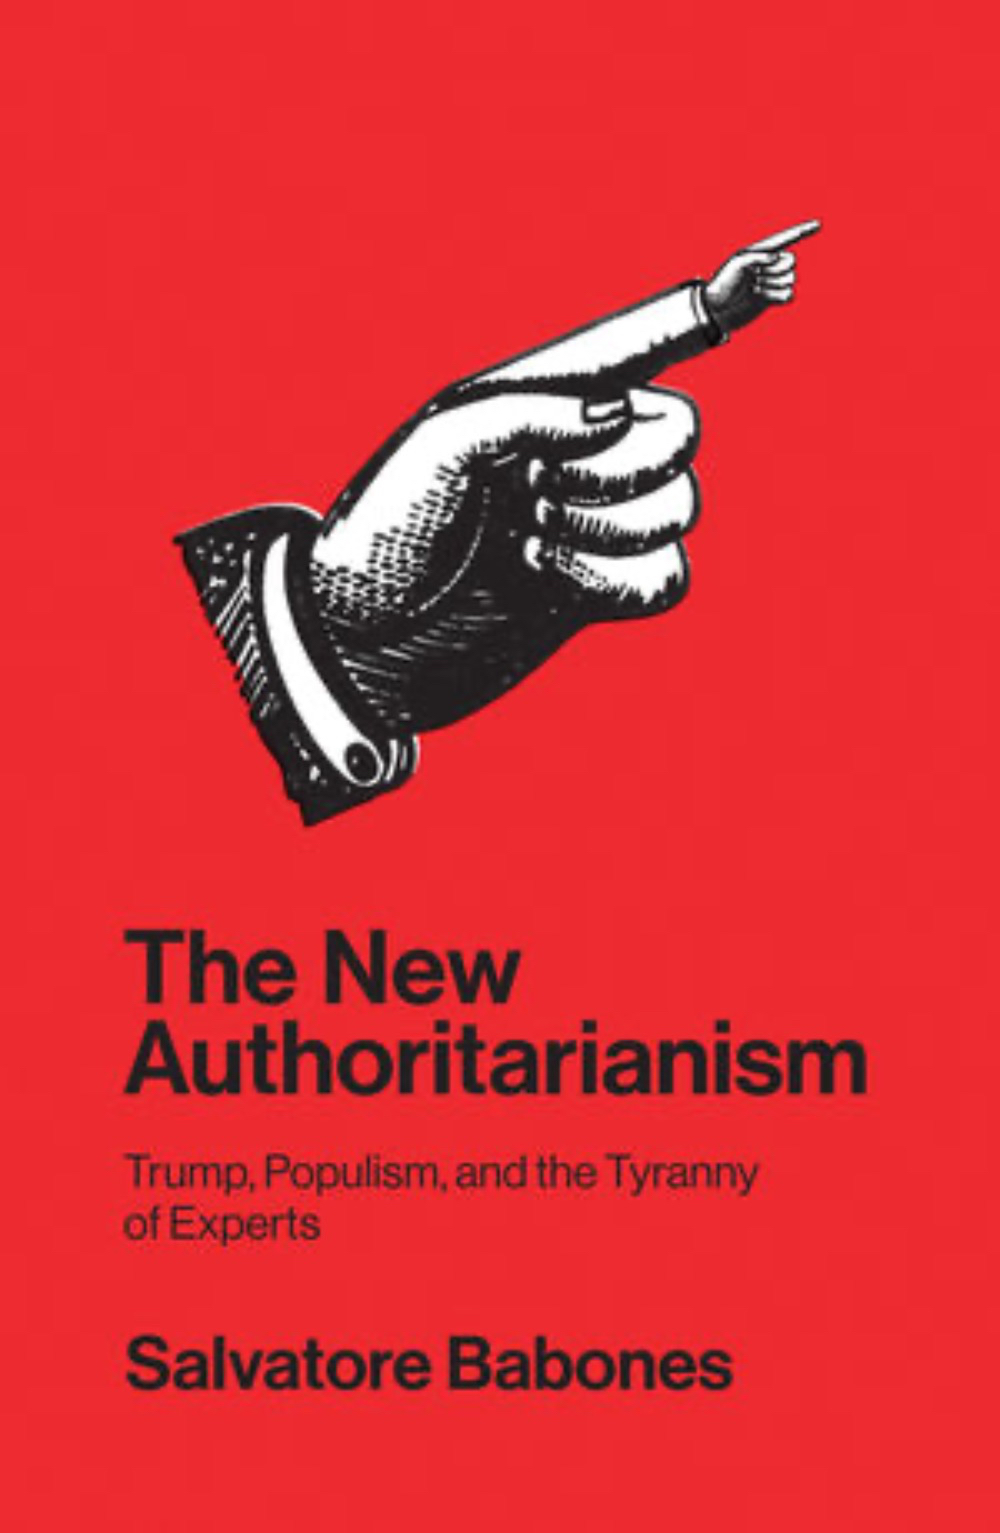 The New Authoritarianism - Trump, Populism and the Tyranny of Experts by Salvatore Babones